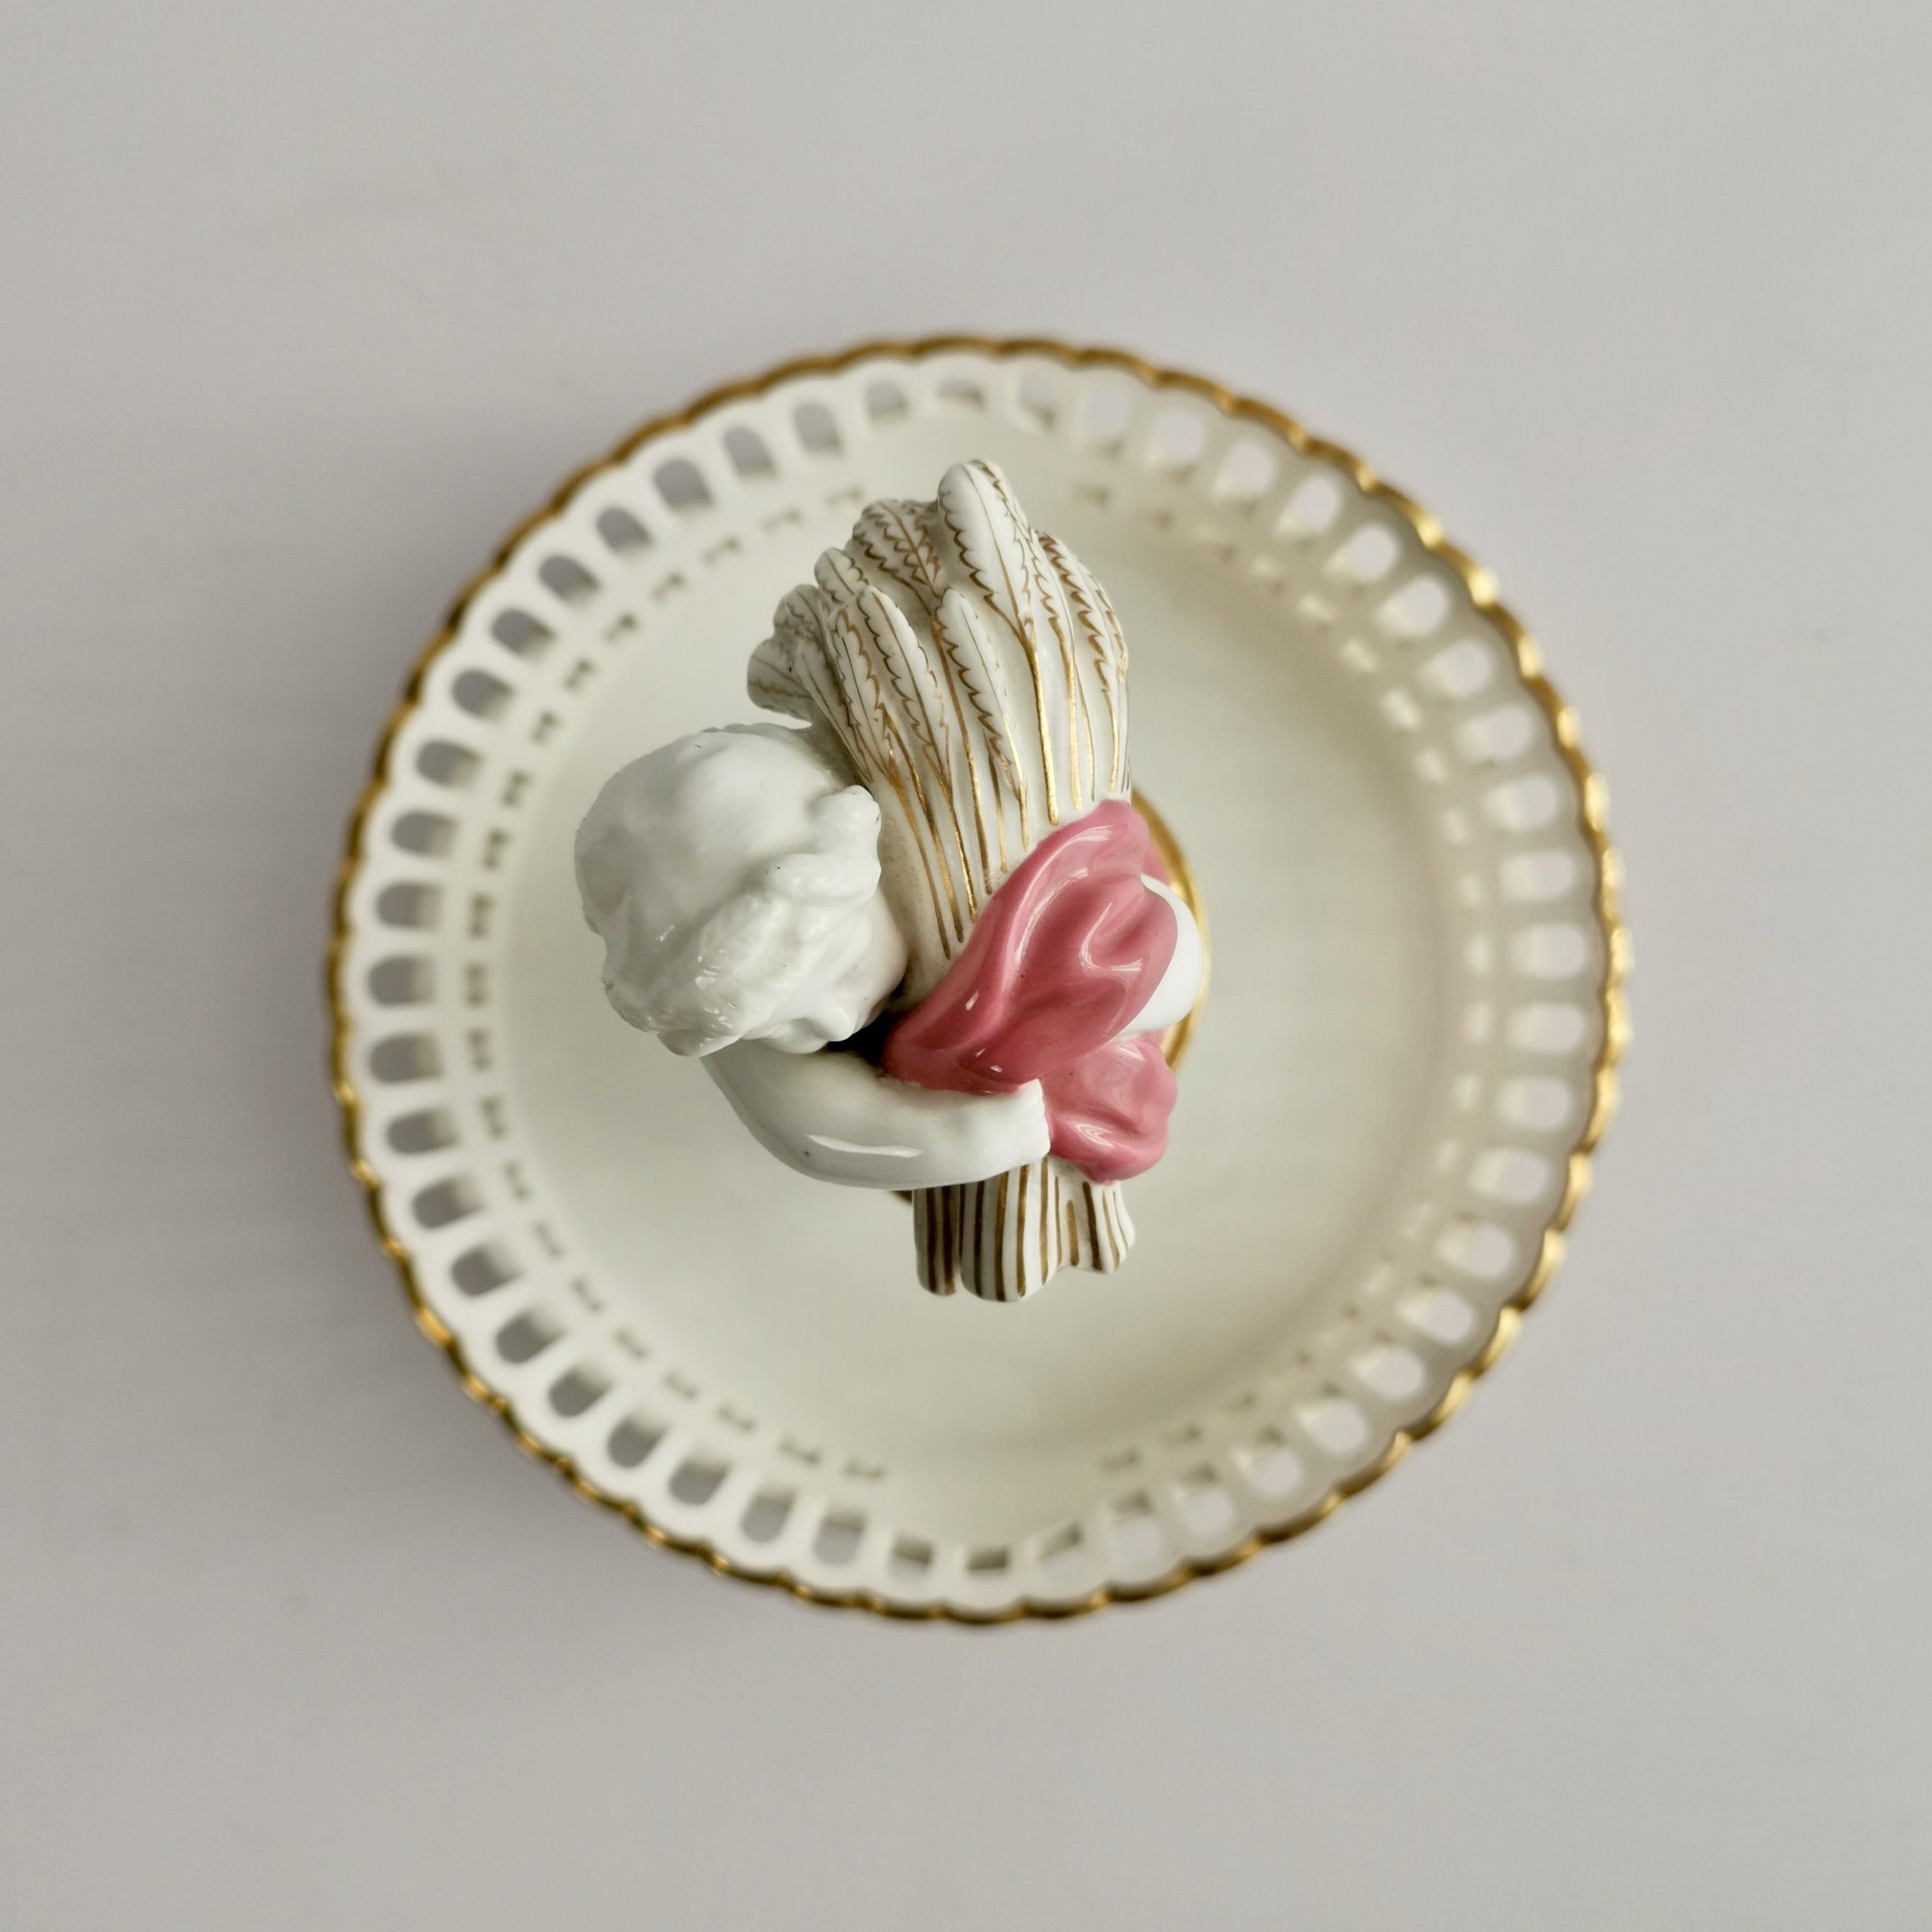 Minton Porcelain Tazza Dish, White and Pink with Cherub, 1891 5